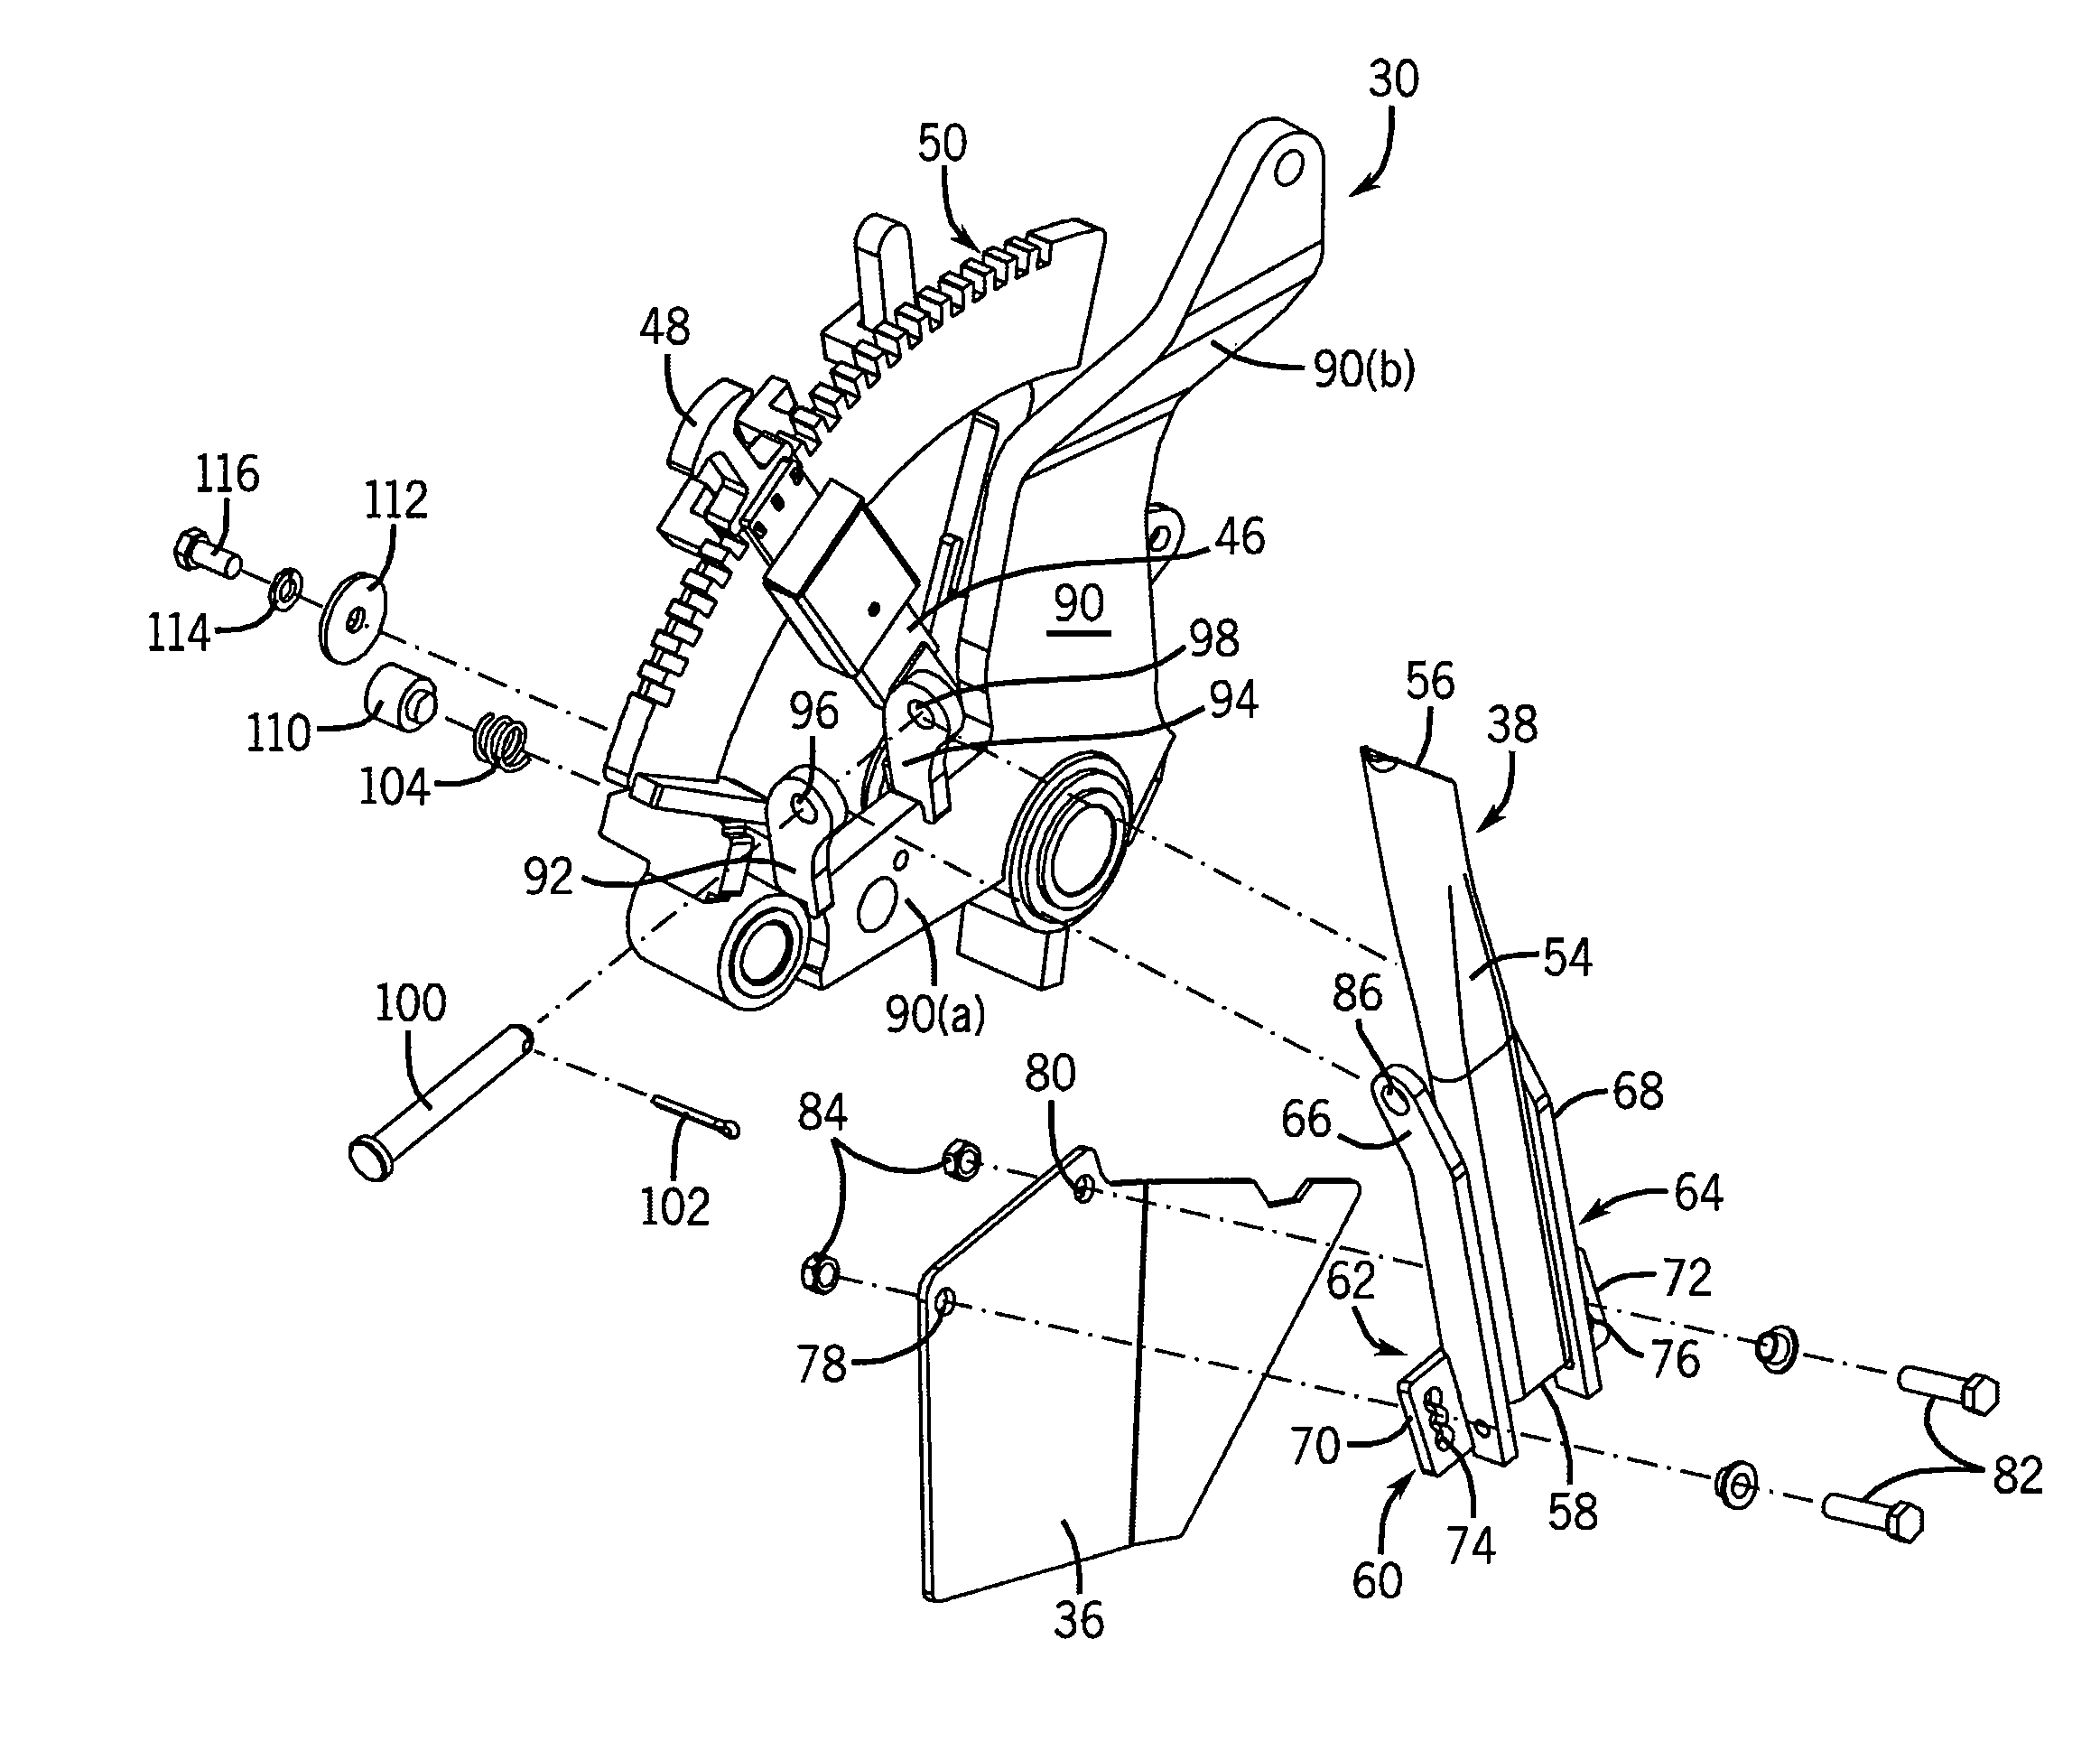 Apparatus for mounting a scraper assembly to an accessory mount of a disc opener that allows deflection of the scraper assembly